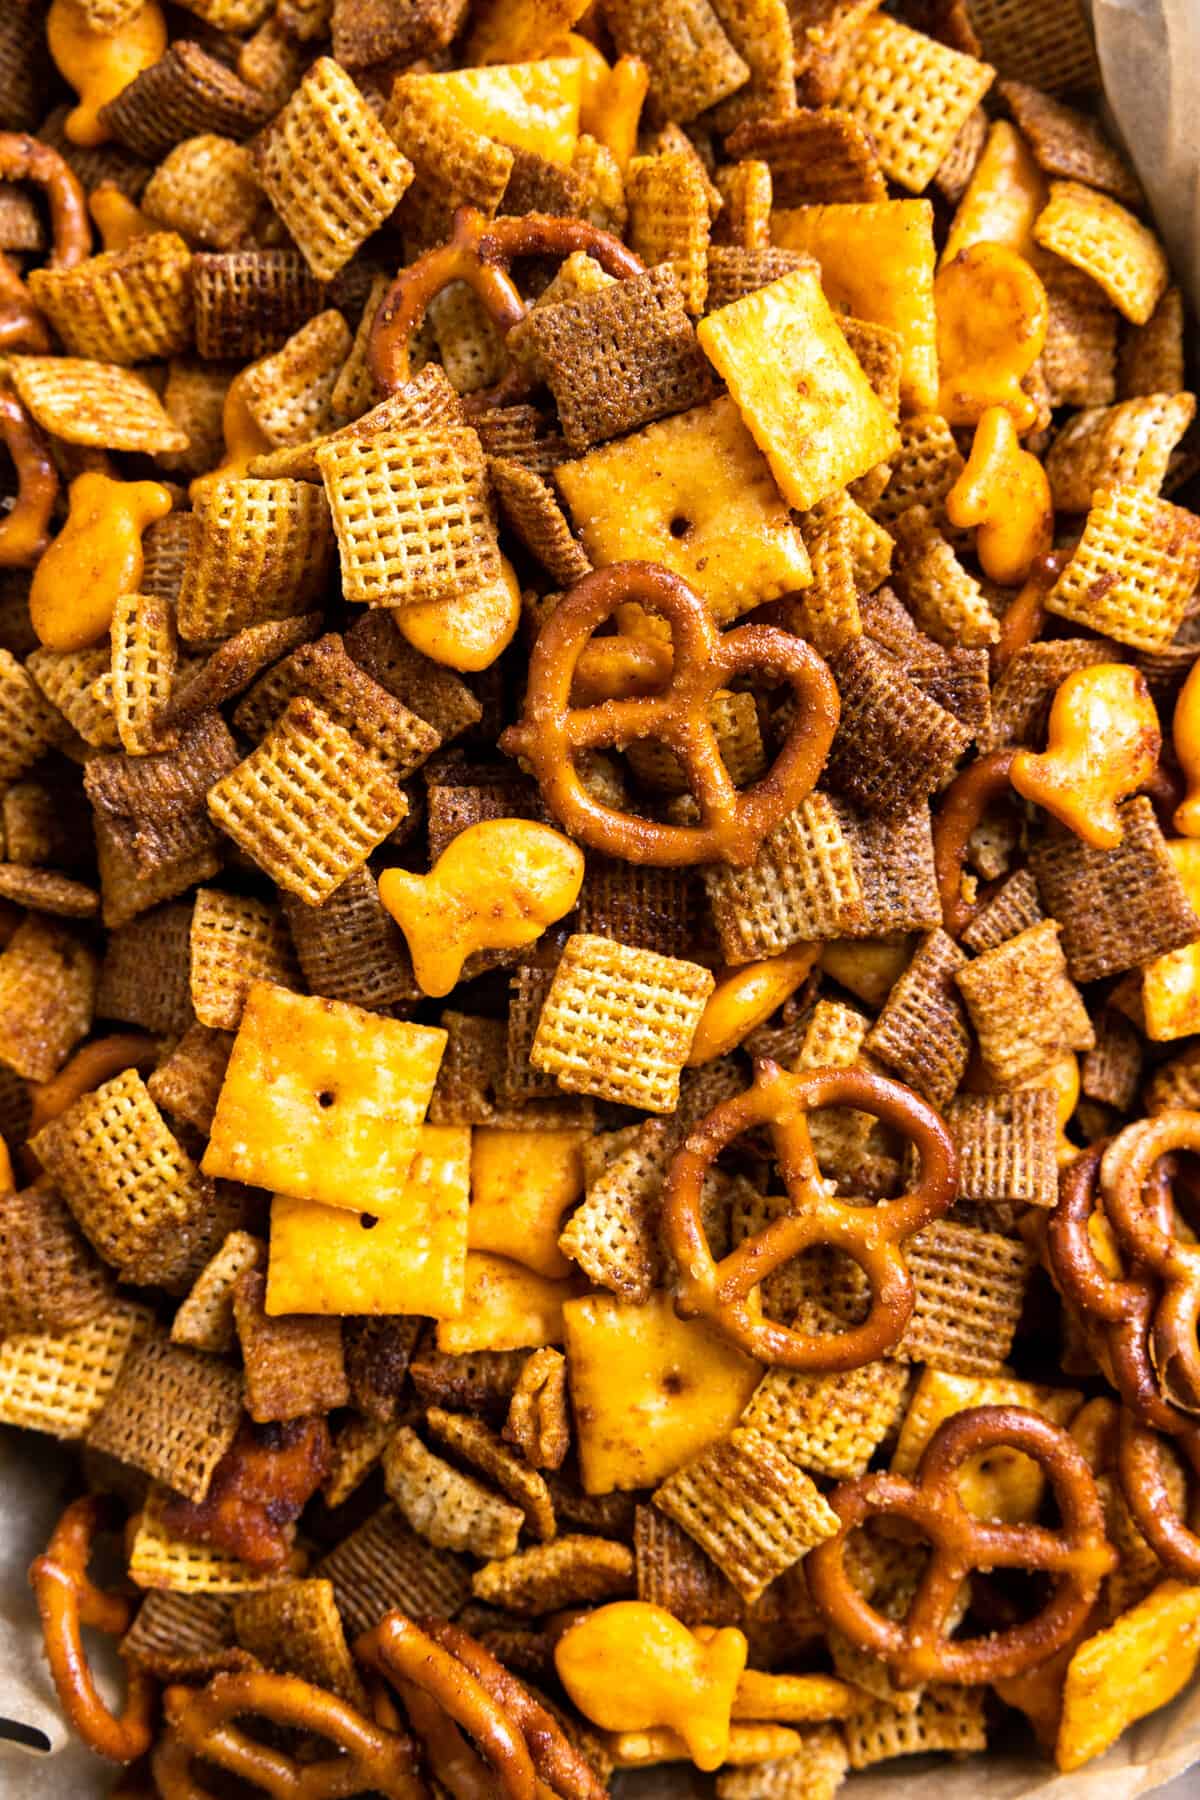 Up close view of Texas Trash loaded up with Chex cereals, pretzels, cheese cracker and goldfish.